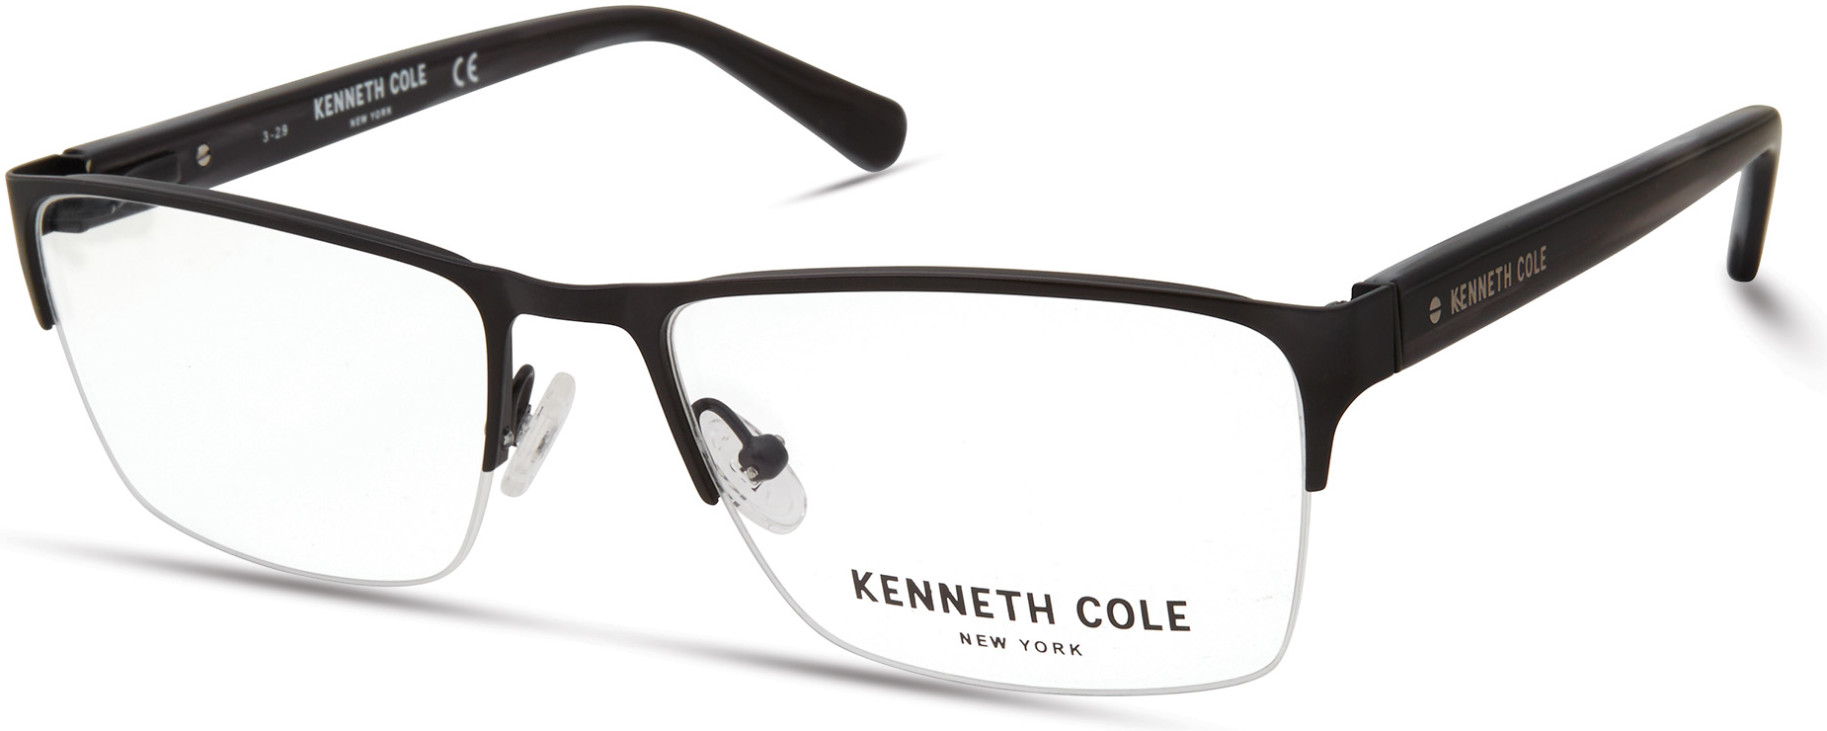 KENNETH COLE NY 0313 002